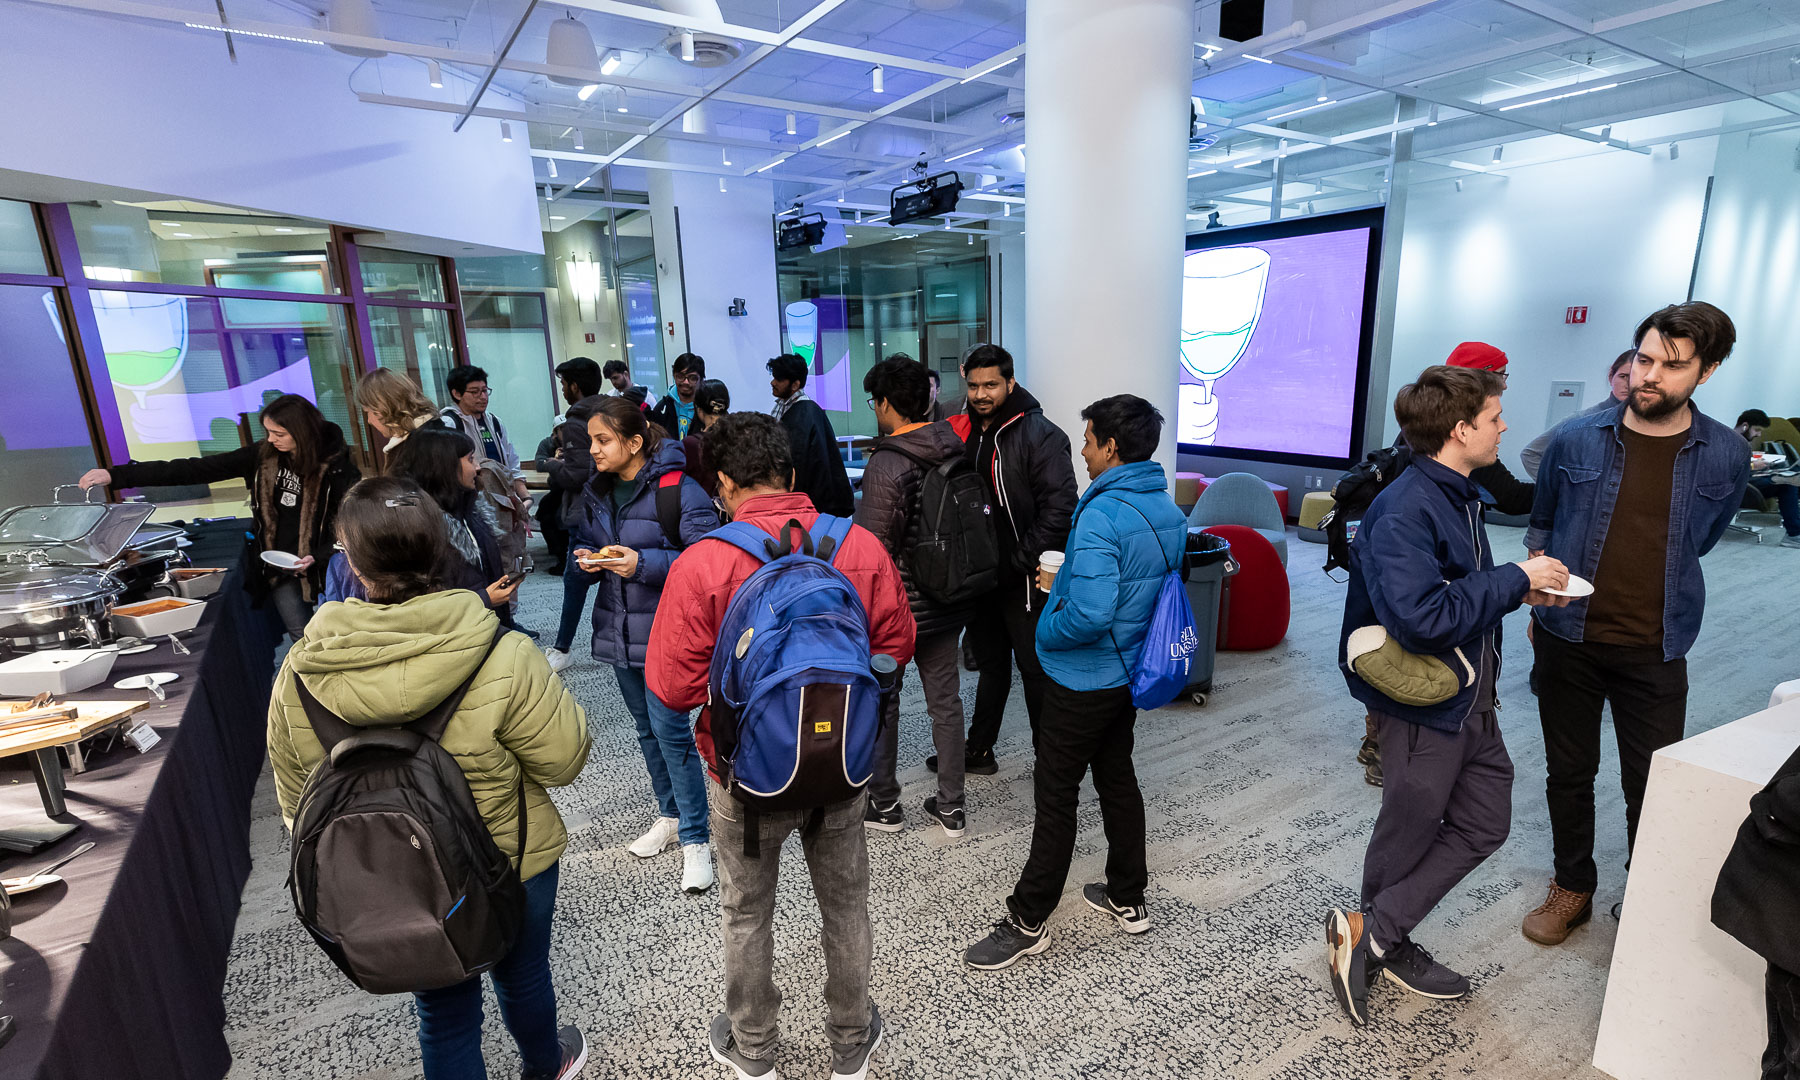 The Jarvis Center connects students with industry professionals, creators and experts-in-residence. It is a locus of interdisciplinary activity that inspires both faculty and student-led curricular and extra-curricular innovation.